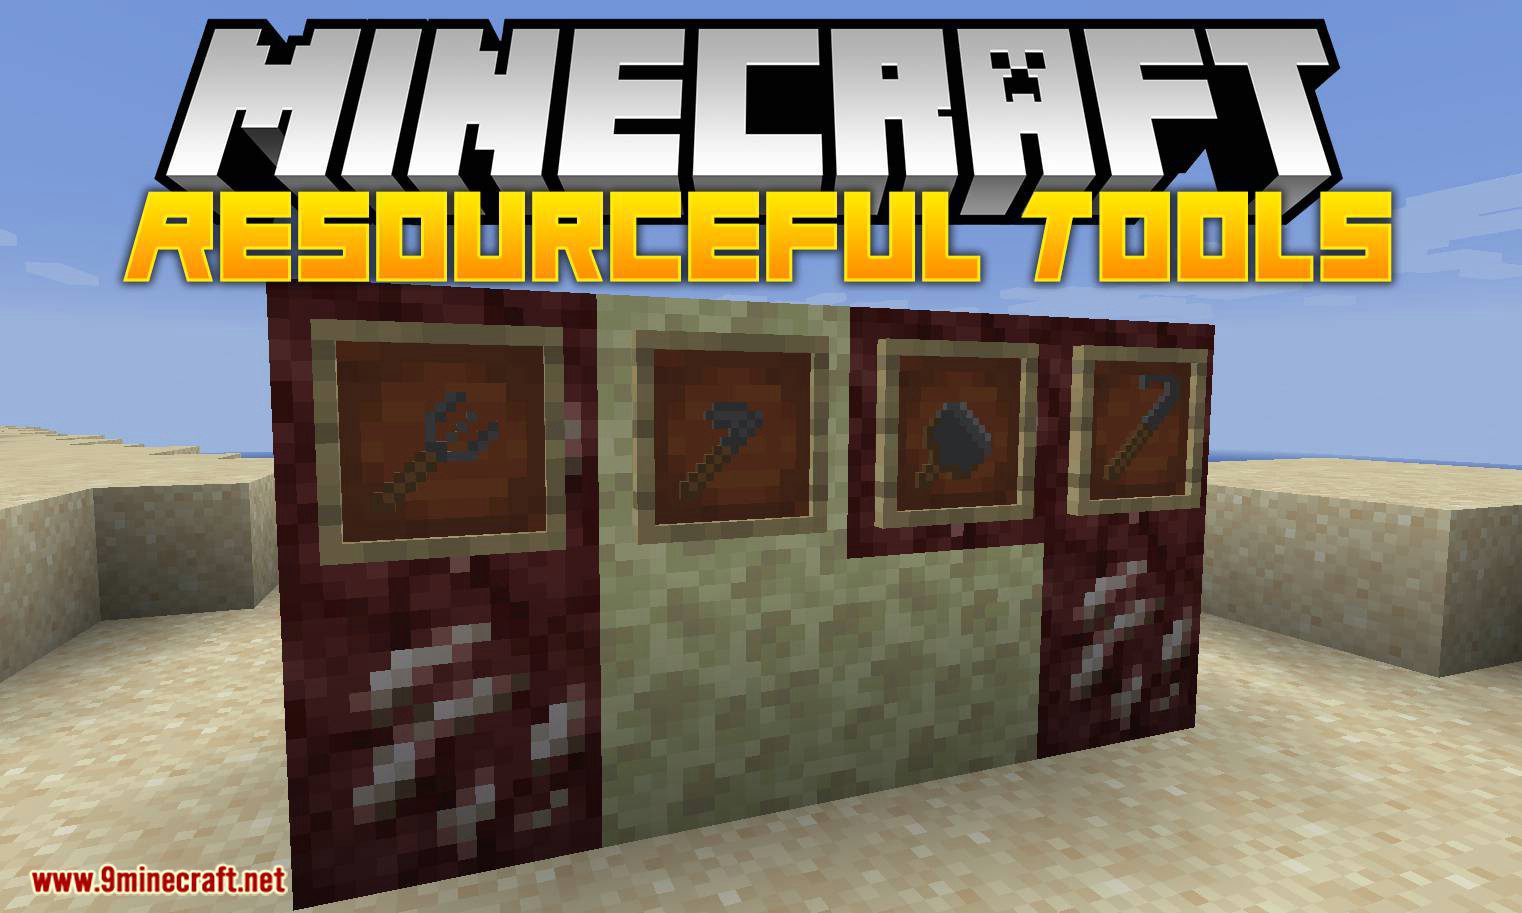 Resourceful Tools mod for minecraft logo